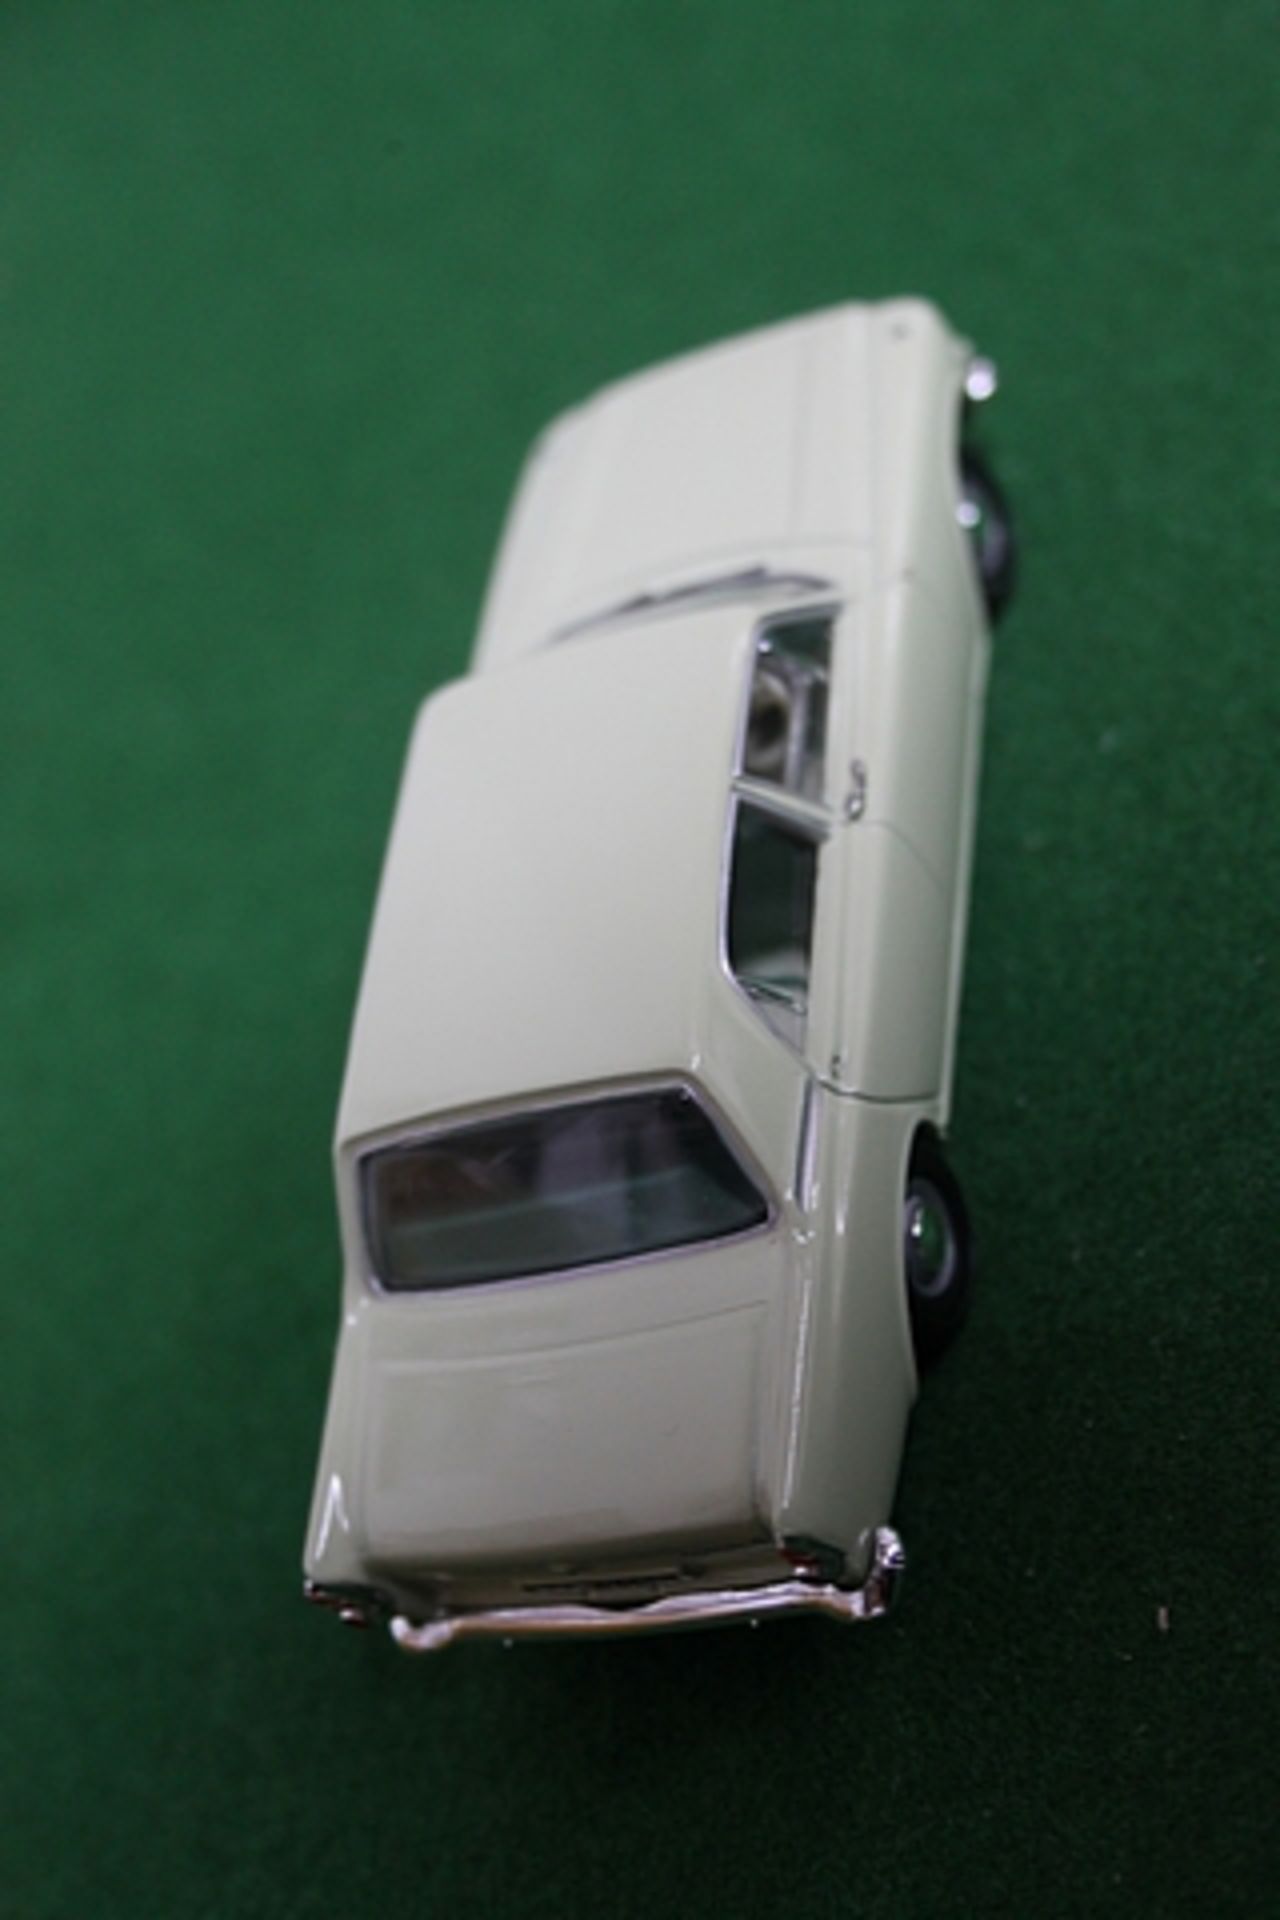 Vanguards # VA06000 Diecast Ford Zephyr 4 Mark III In Lime Green Scale 1/43 Complete With Box - Image 2 of 3